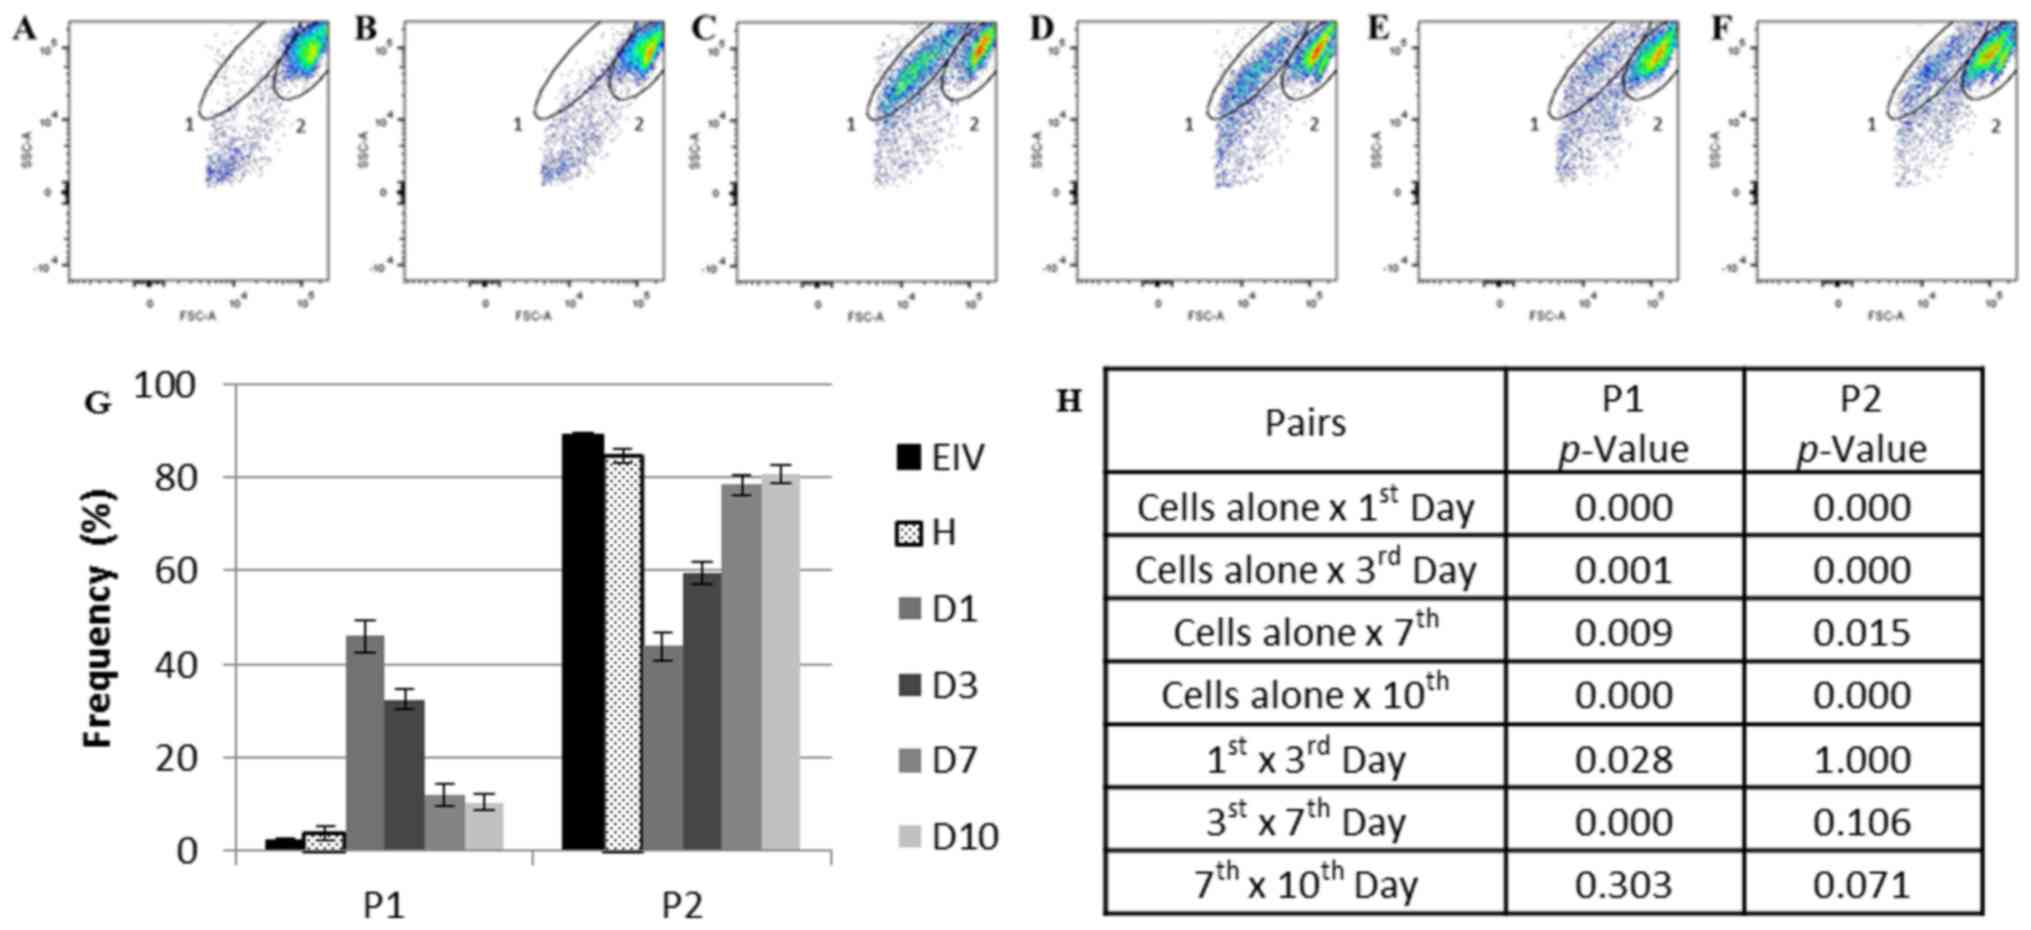 Inflammatory Cytokine Profile Of Co Cultivated Primary Cells From The Endometrium Of Women With And Without Endometriosis